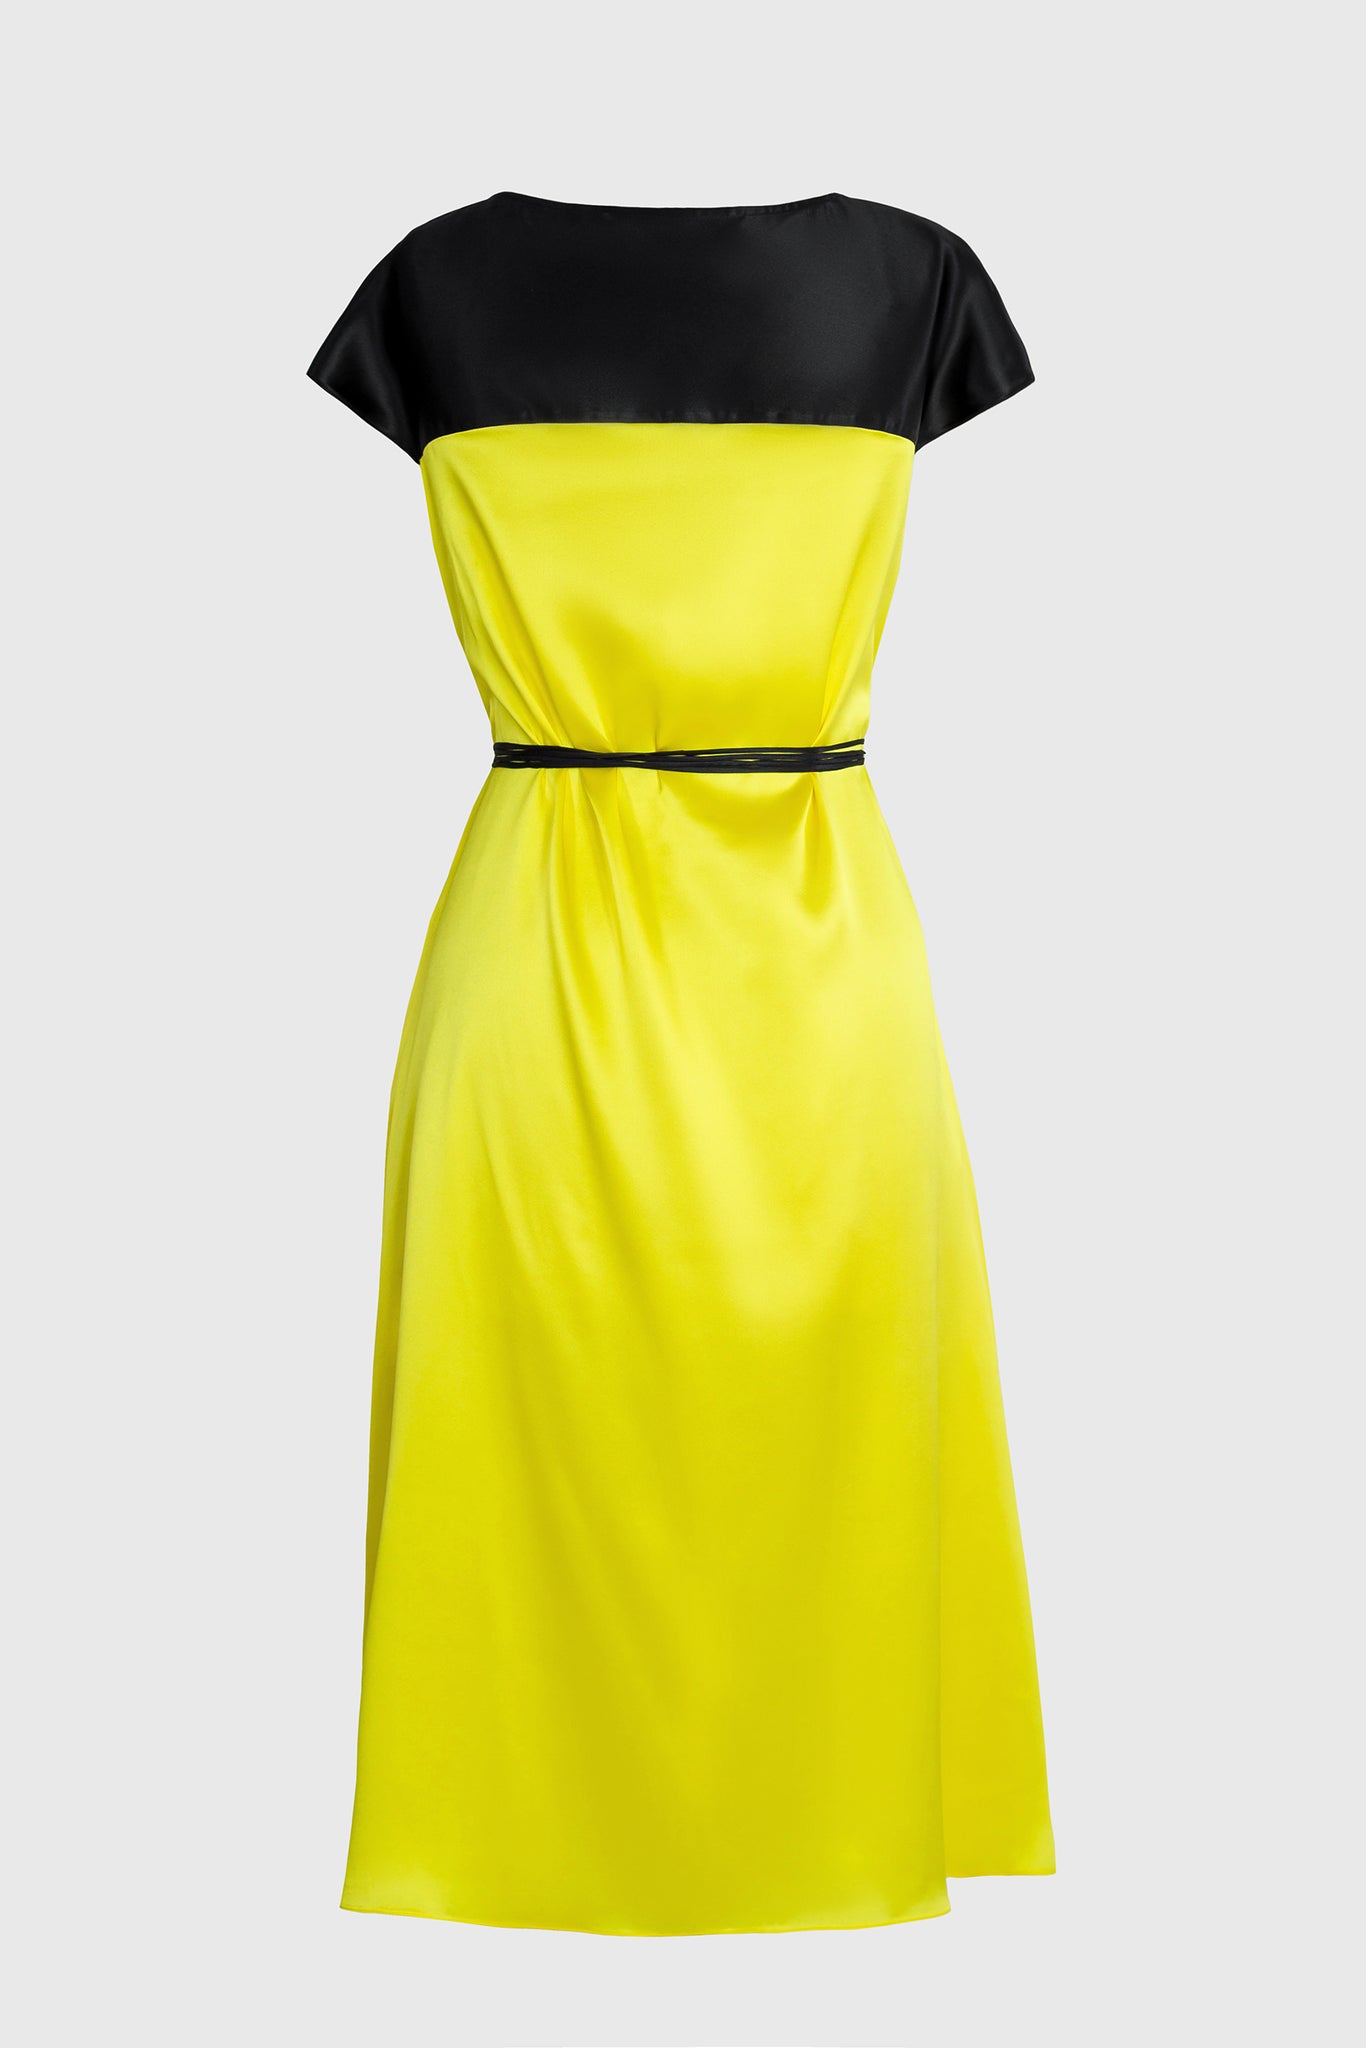 Ruxandra mid-length a-line dress, eye catching volume, bias cut casual or party dress, simple cut, French seams, 100% Italian Silk dress, lemon yellow colors, black details, relaxed summer style, beach wear,